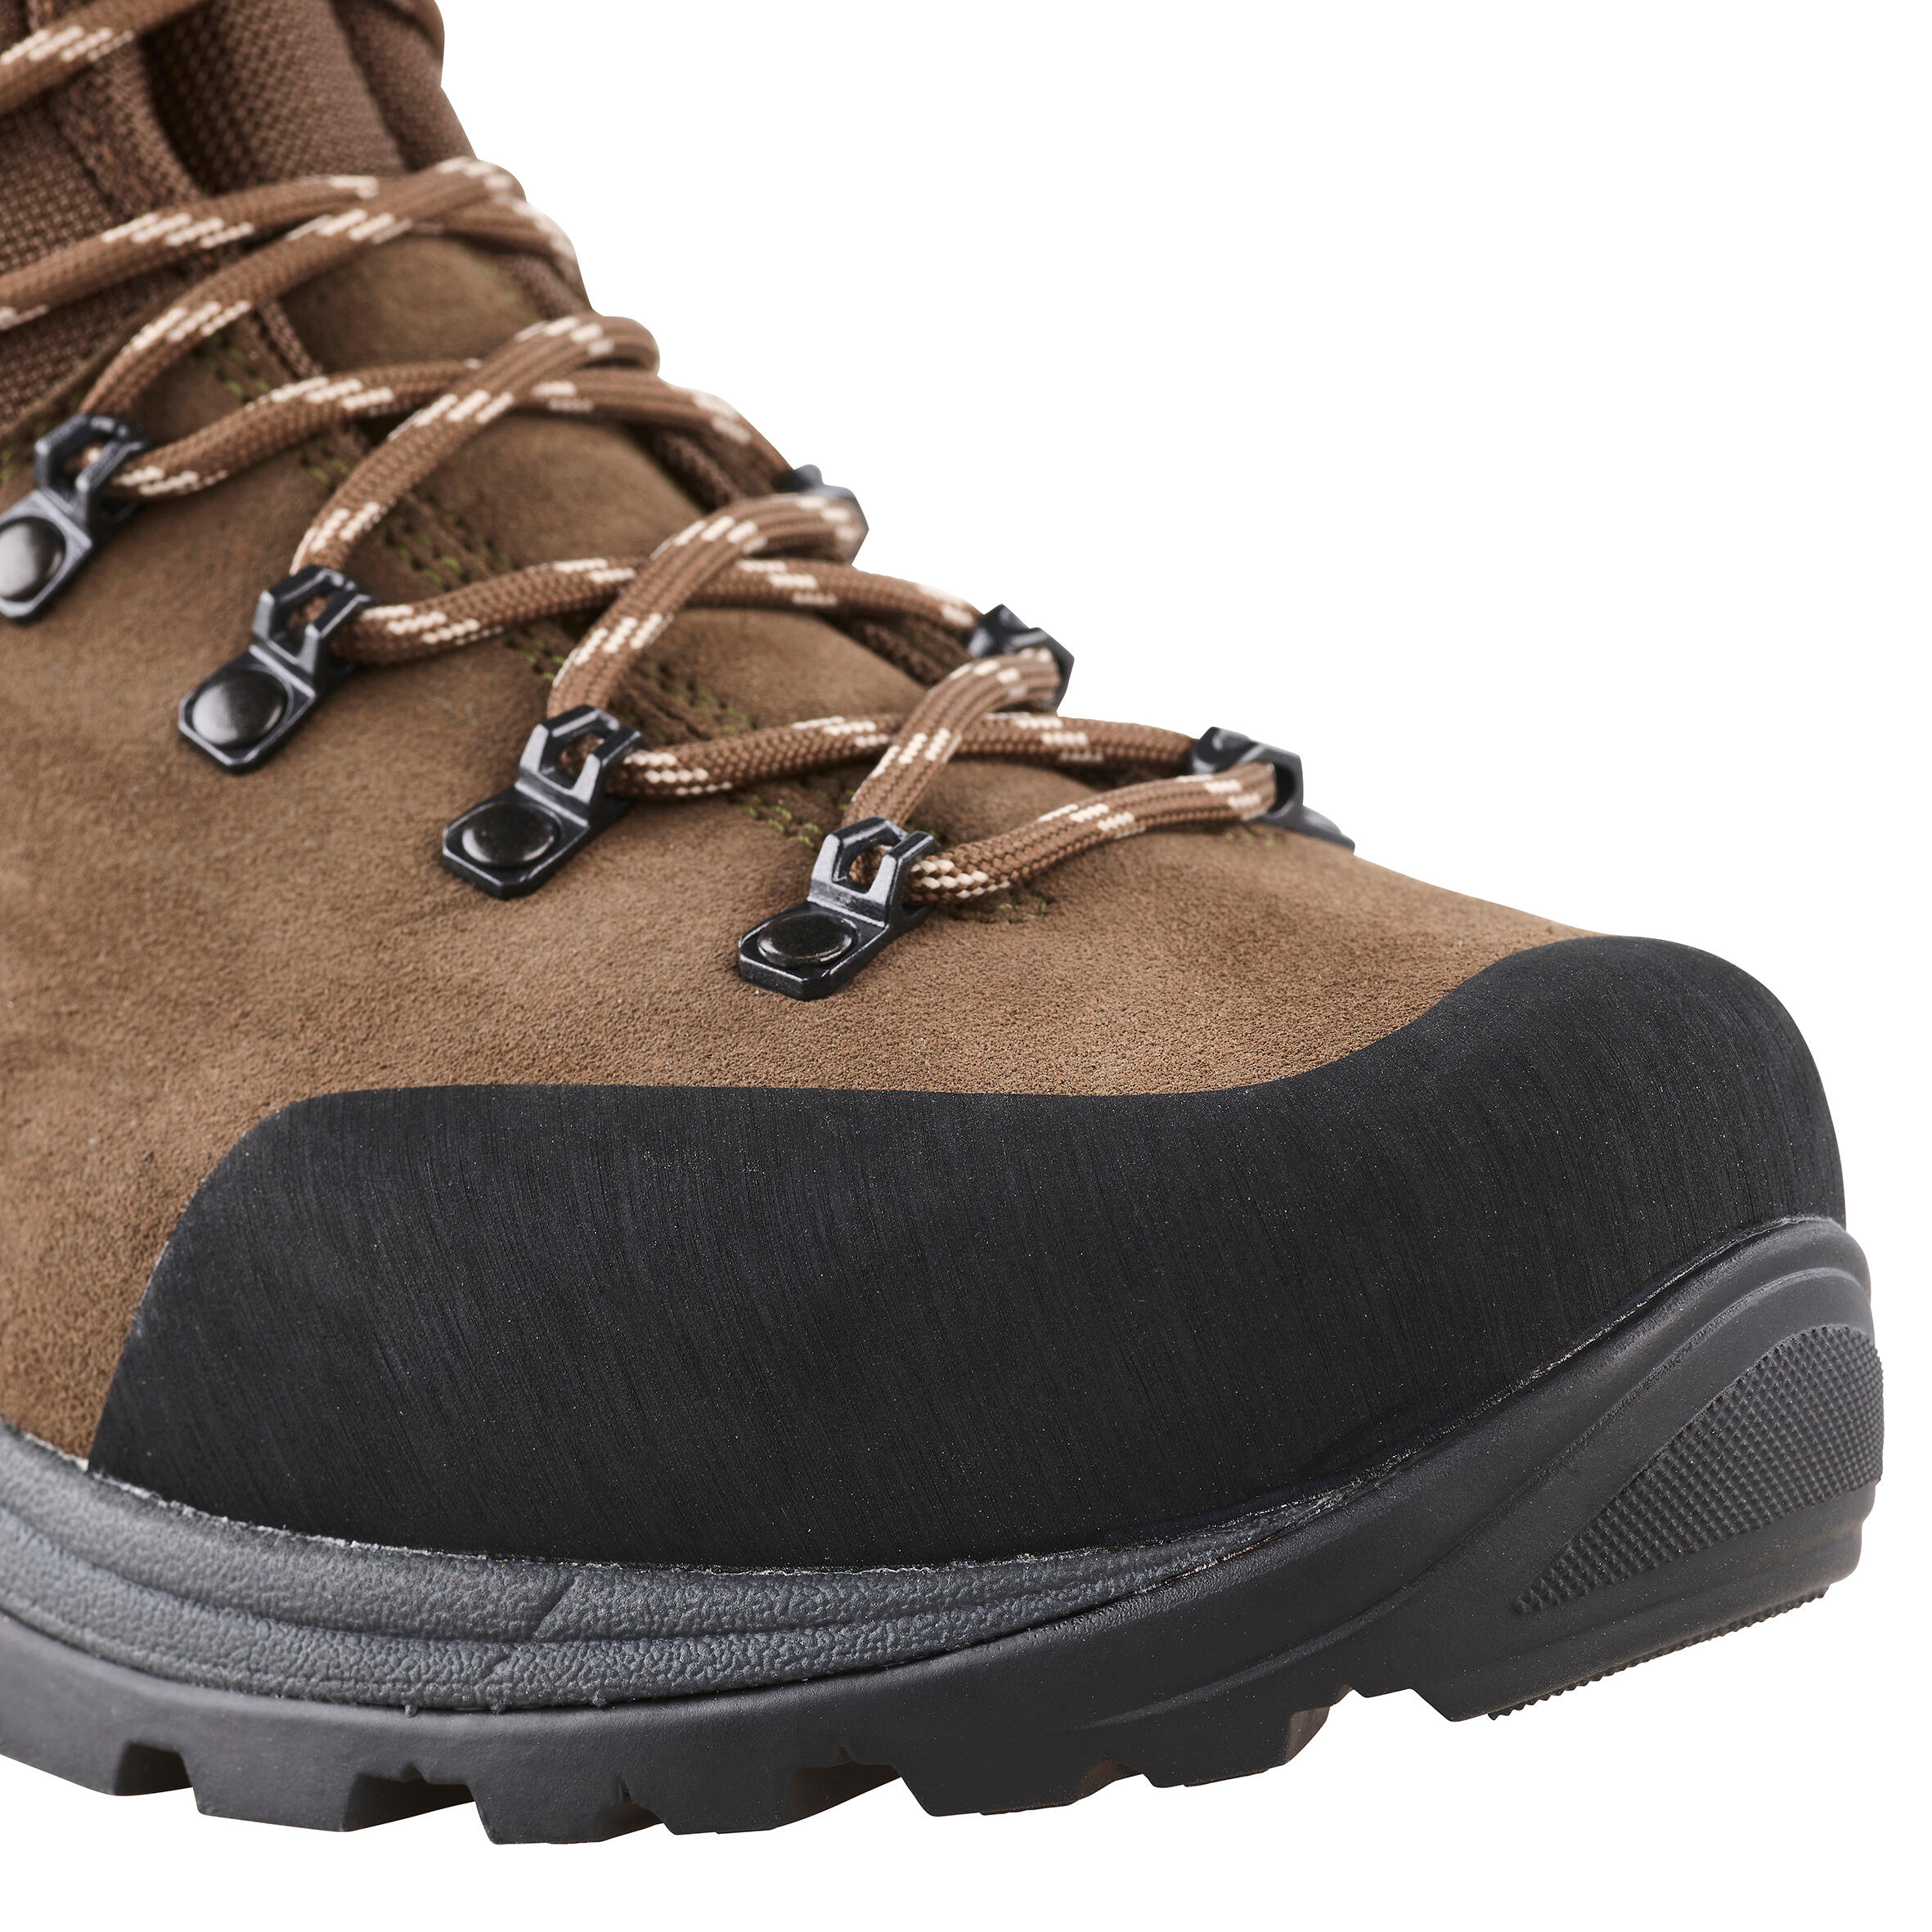 Waterproof Country Sport Boots Asolo X-Hunt Forest Gore-Tex Vibram 10/14